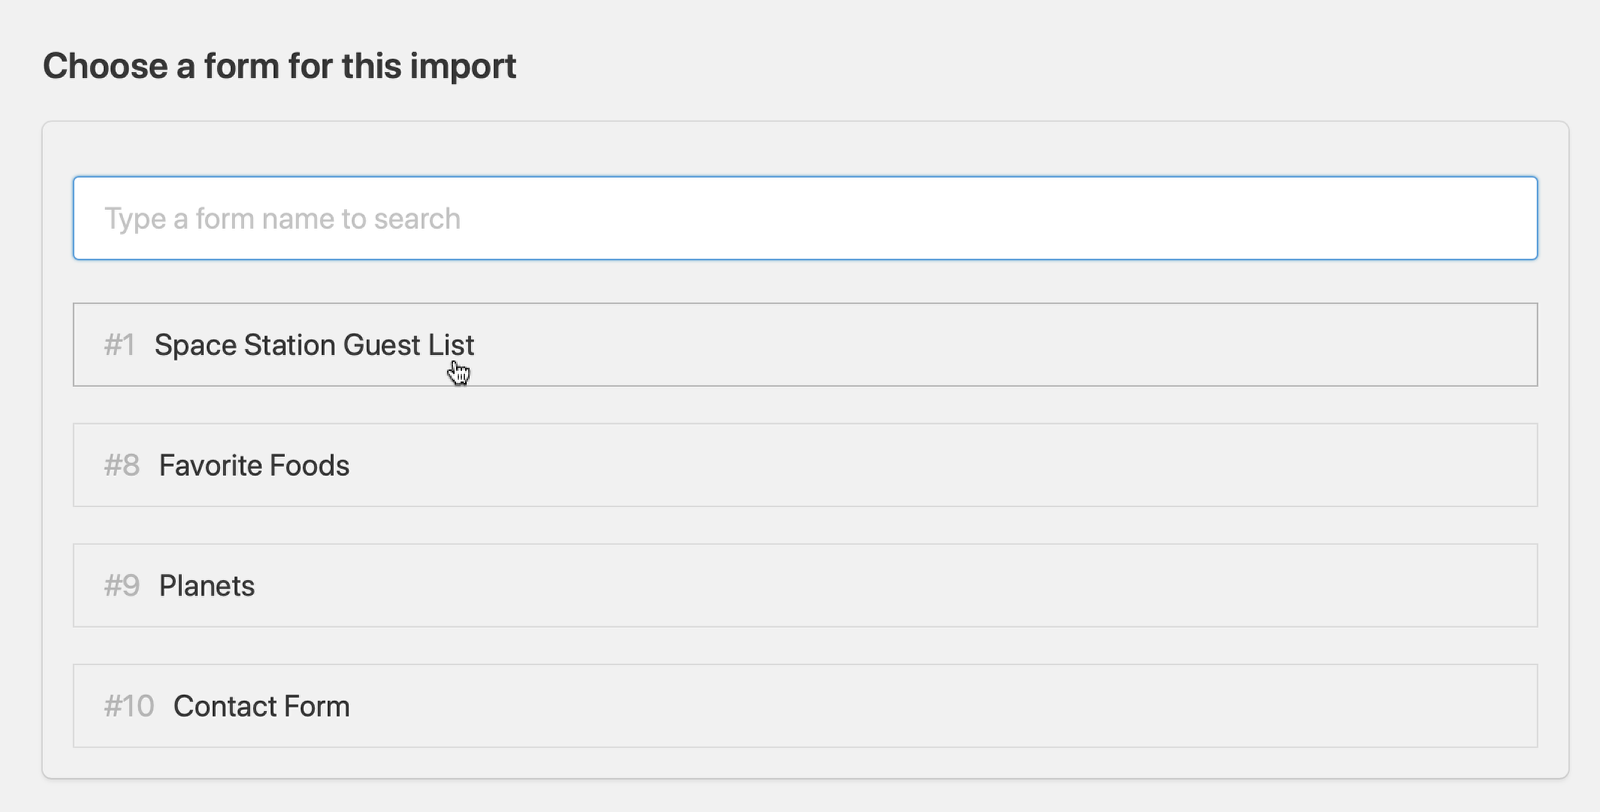 If you choose to import into an existing form, click on the form you want to import into